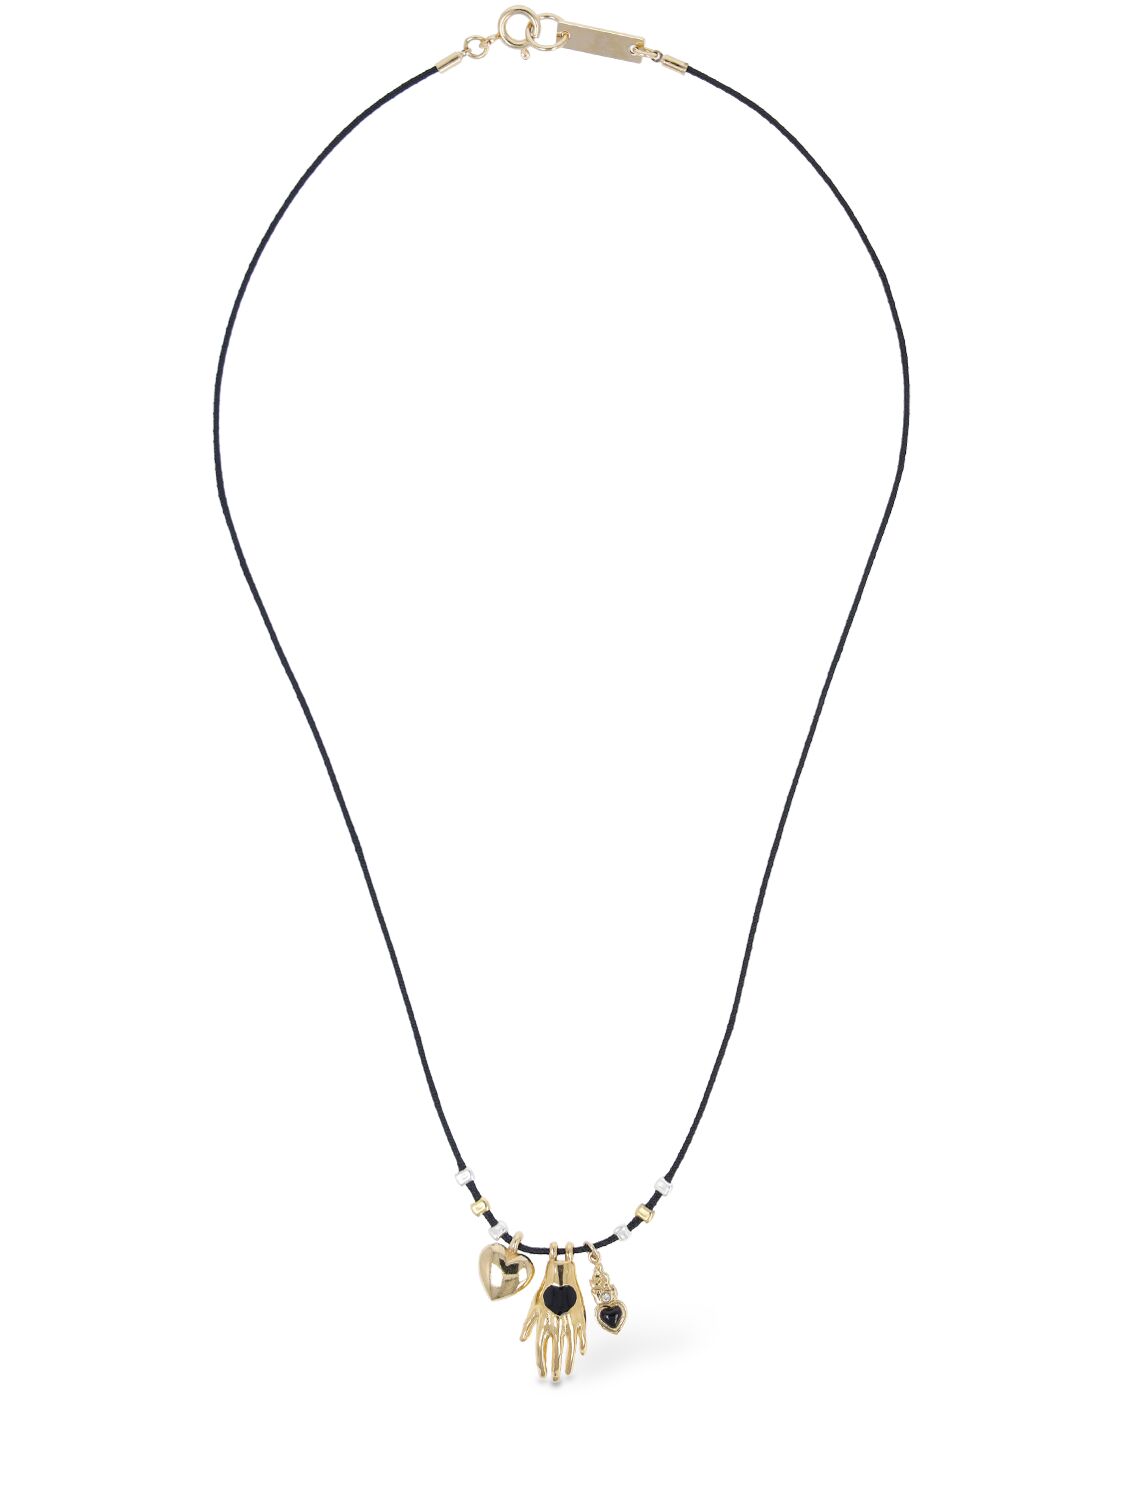 Isabel Marant Happiness Collar Necklace In Black,gold